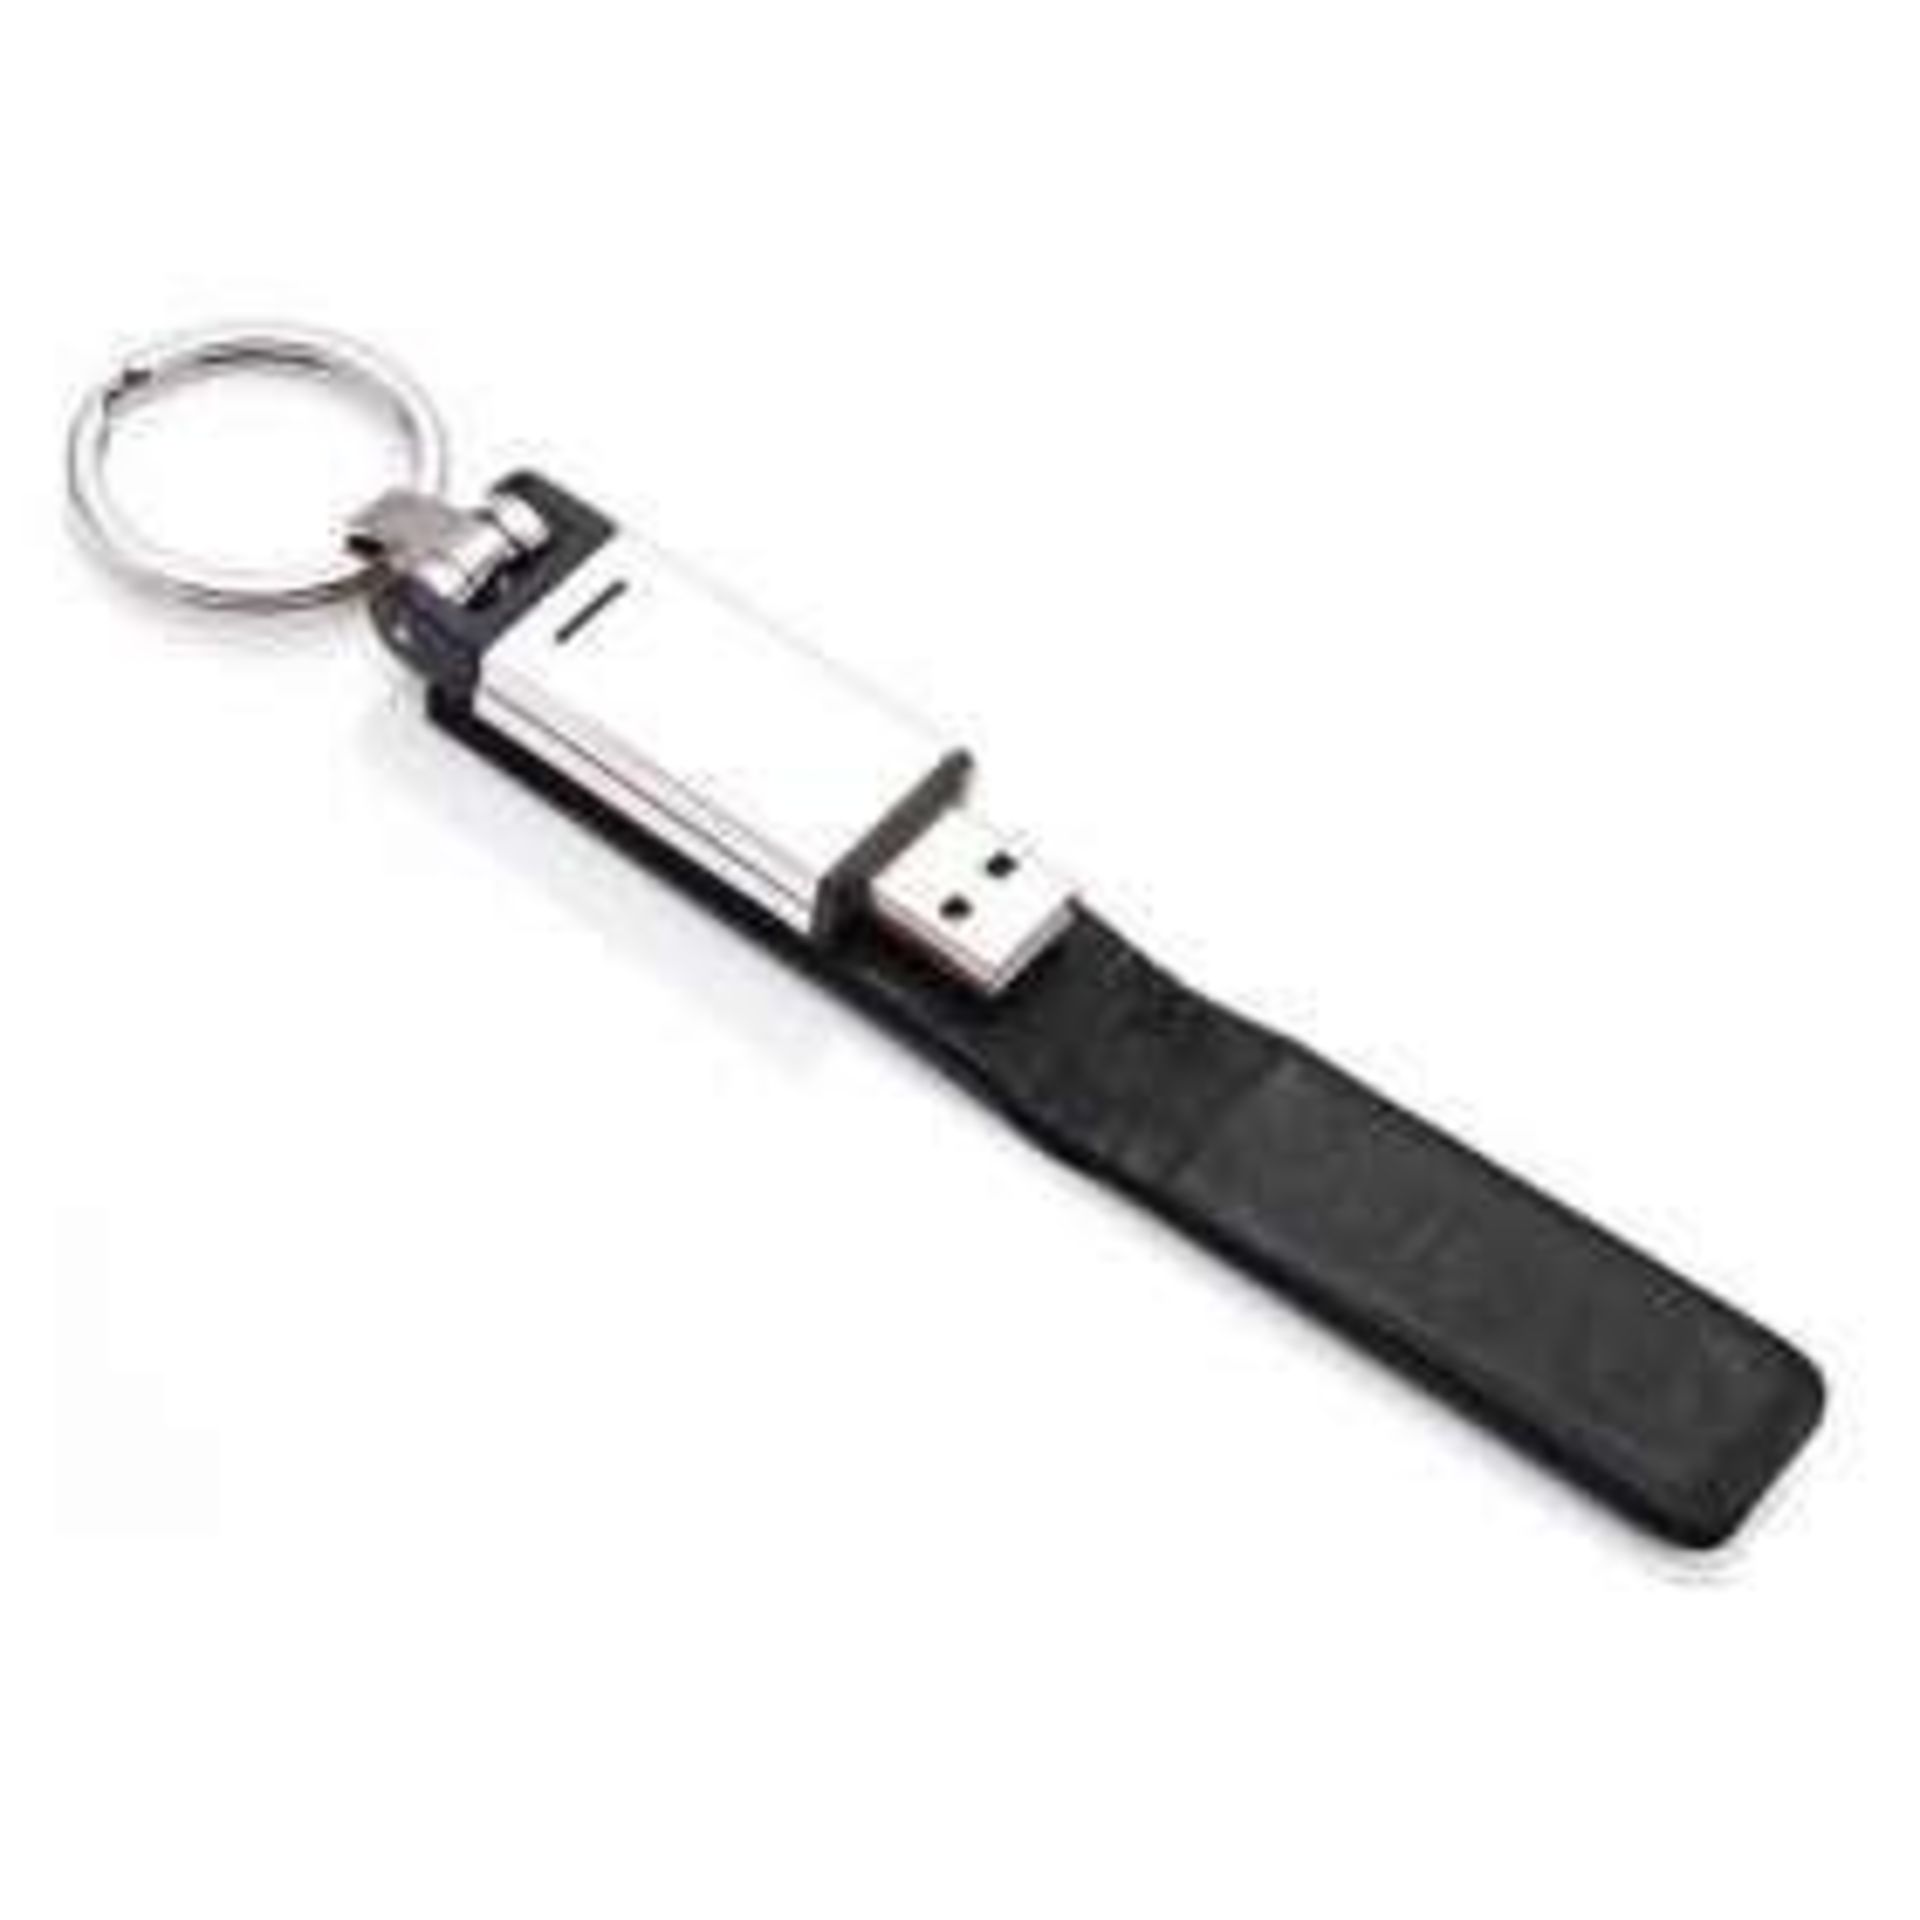 1 x ICE London Silver Plated 2GB USB Flashdrive Keyring - Features A Genuine Leather Wrap With